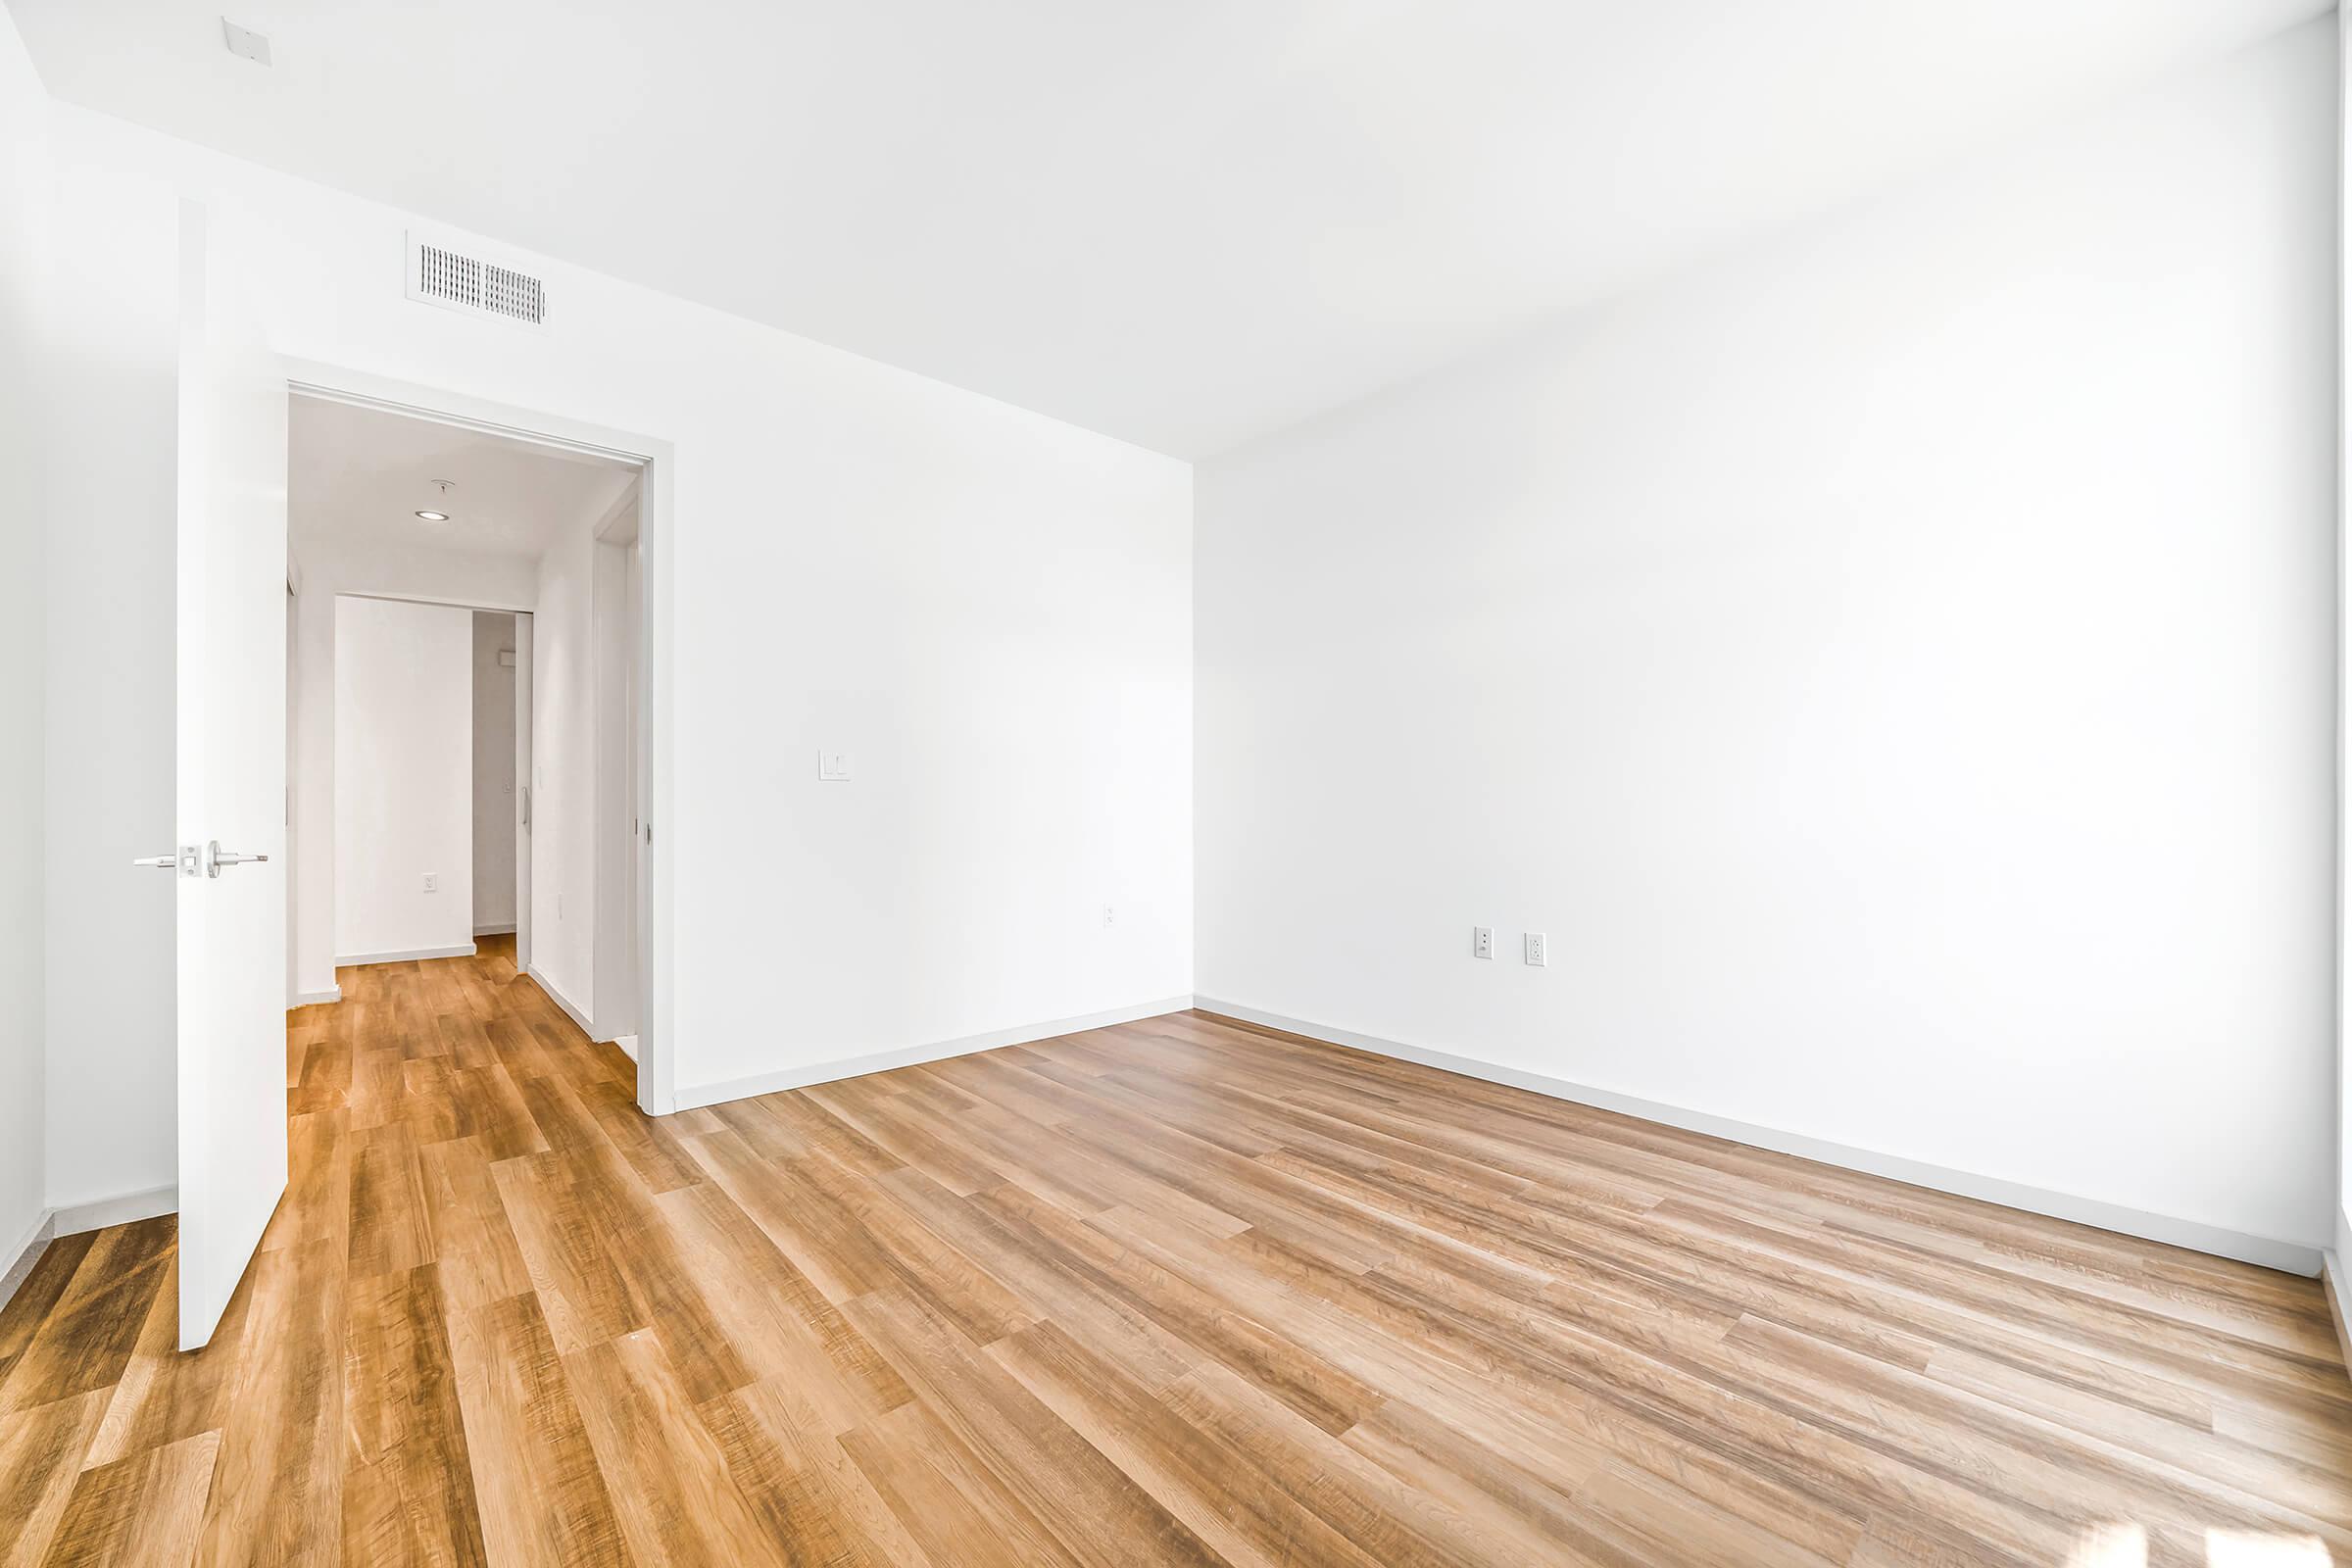 vacant bedroom and hallway with wooden floors